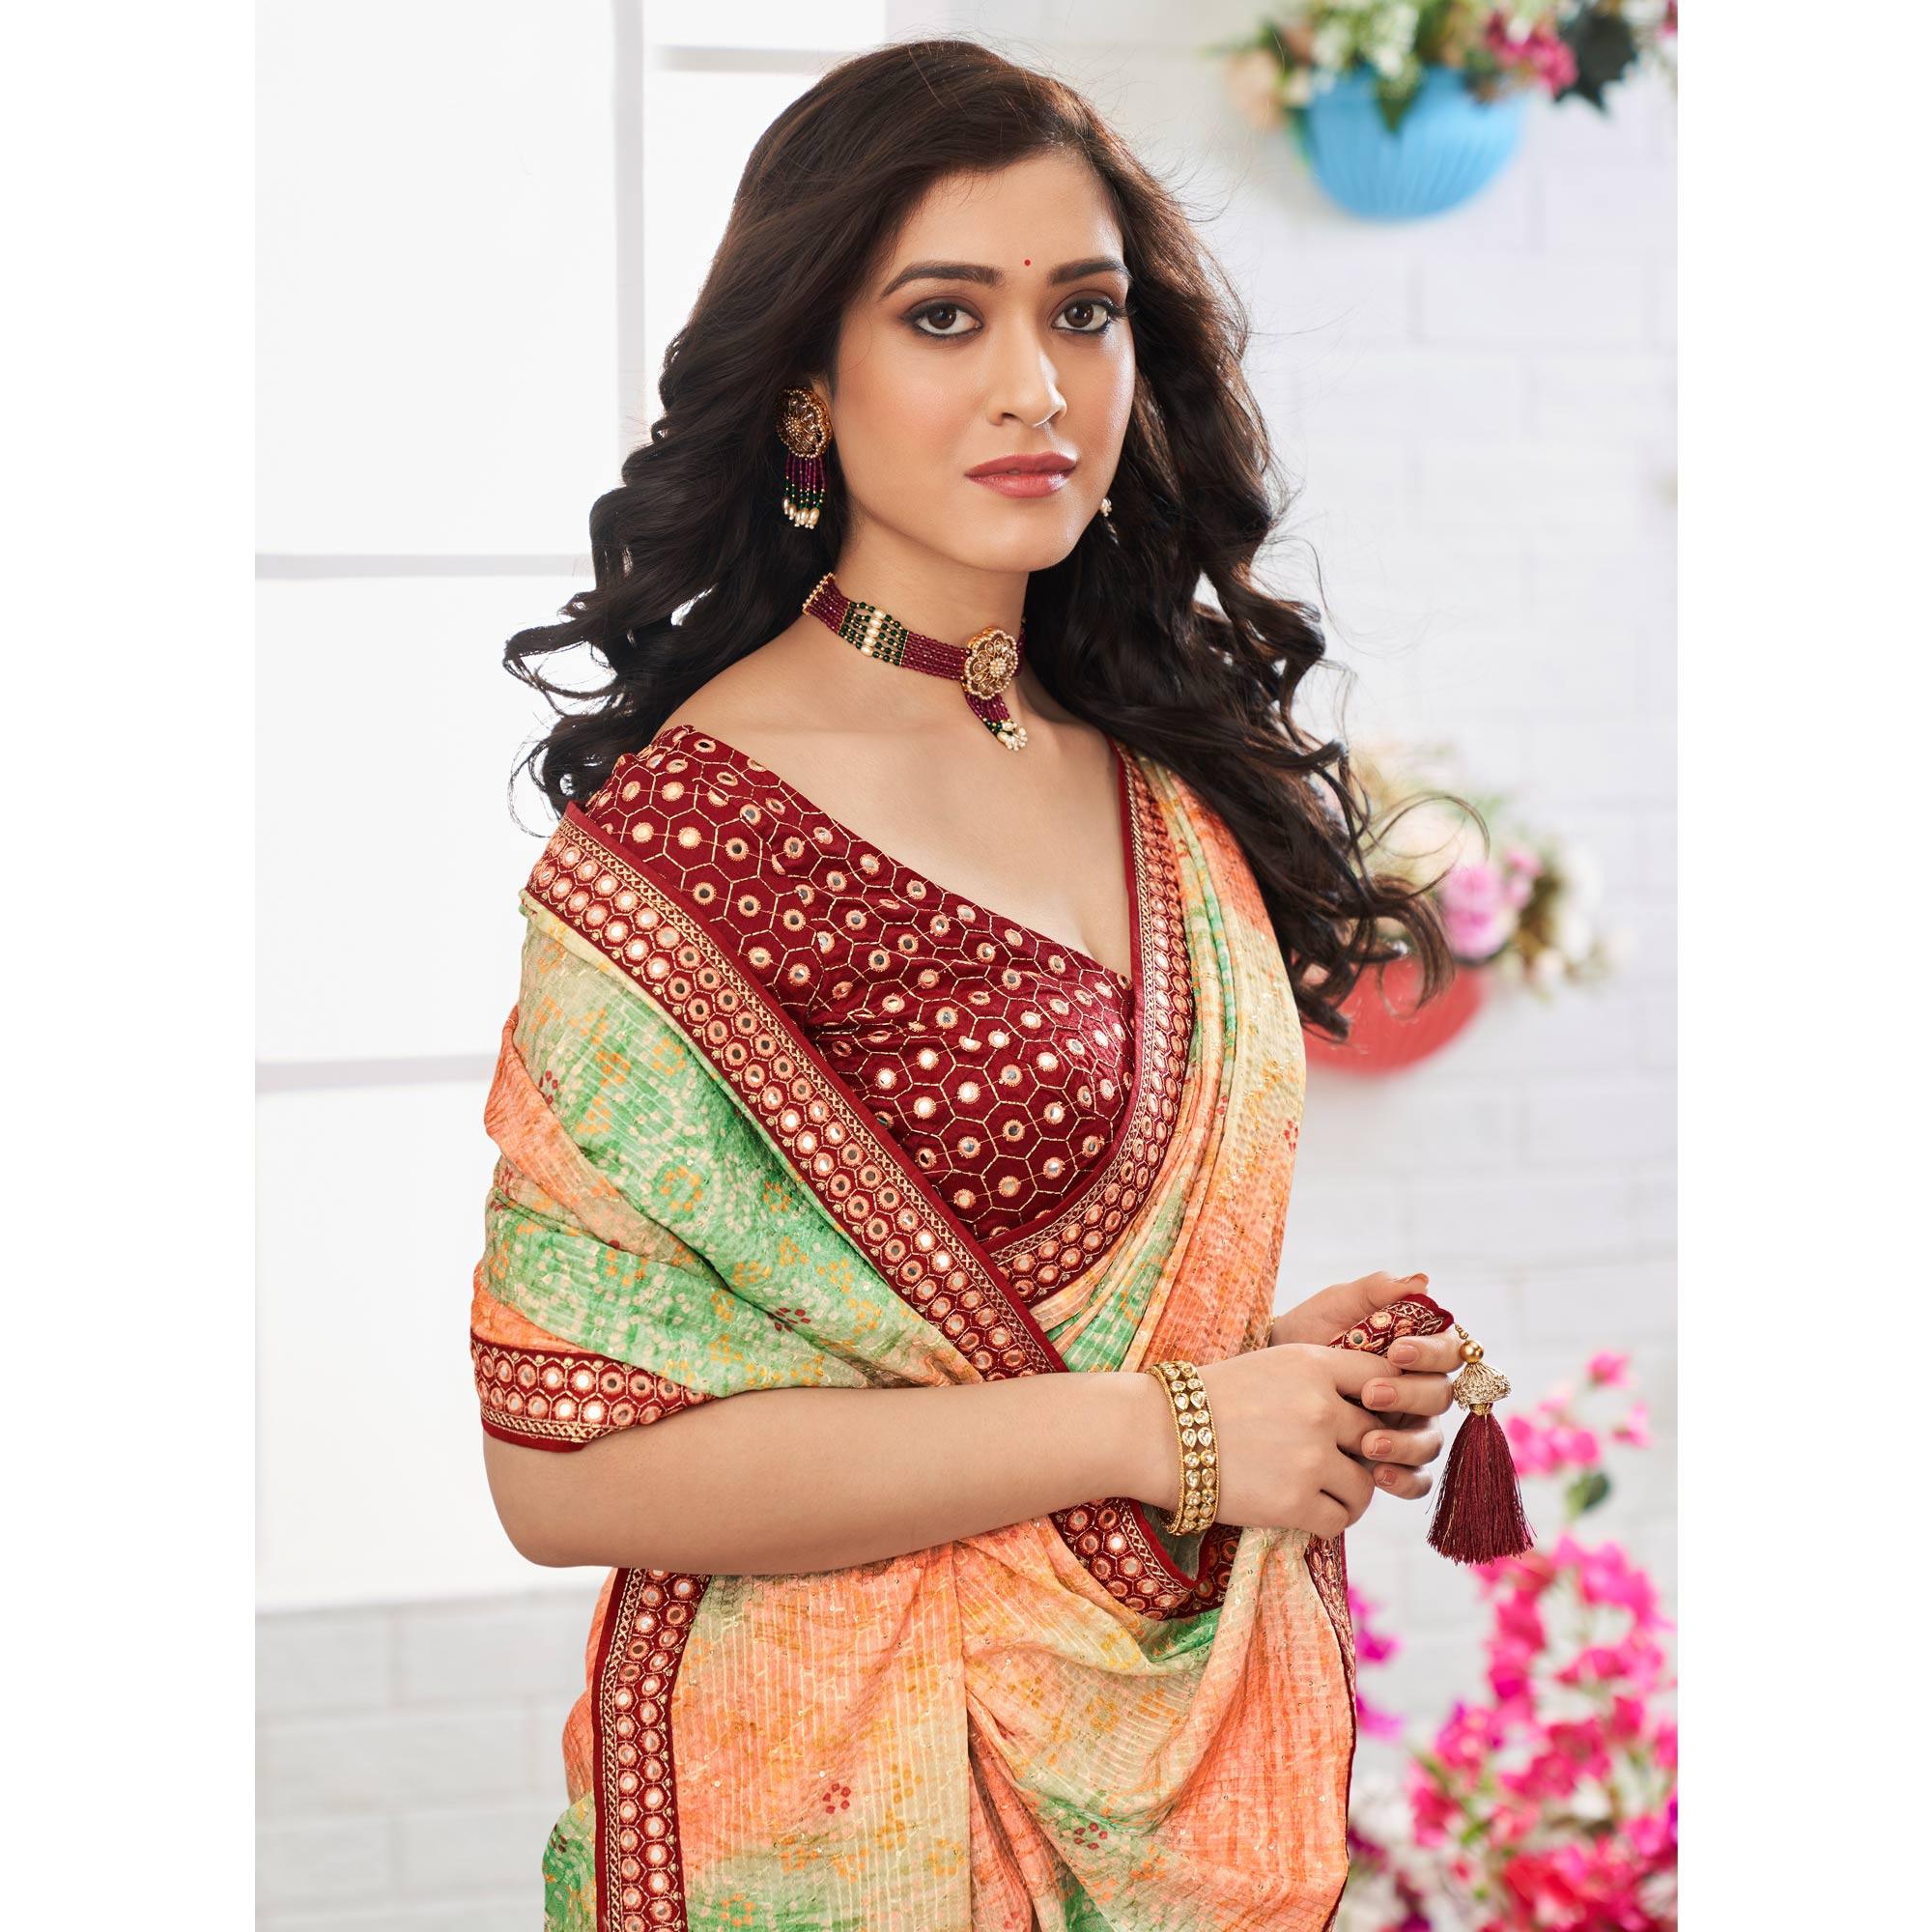 Multicolour Printed With Embellished Chiffon Saree With Tassels - Peachmode